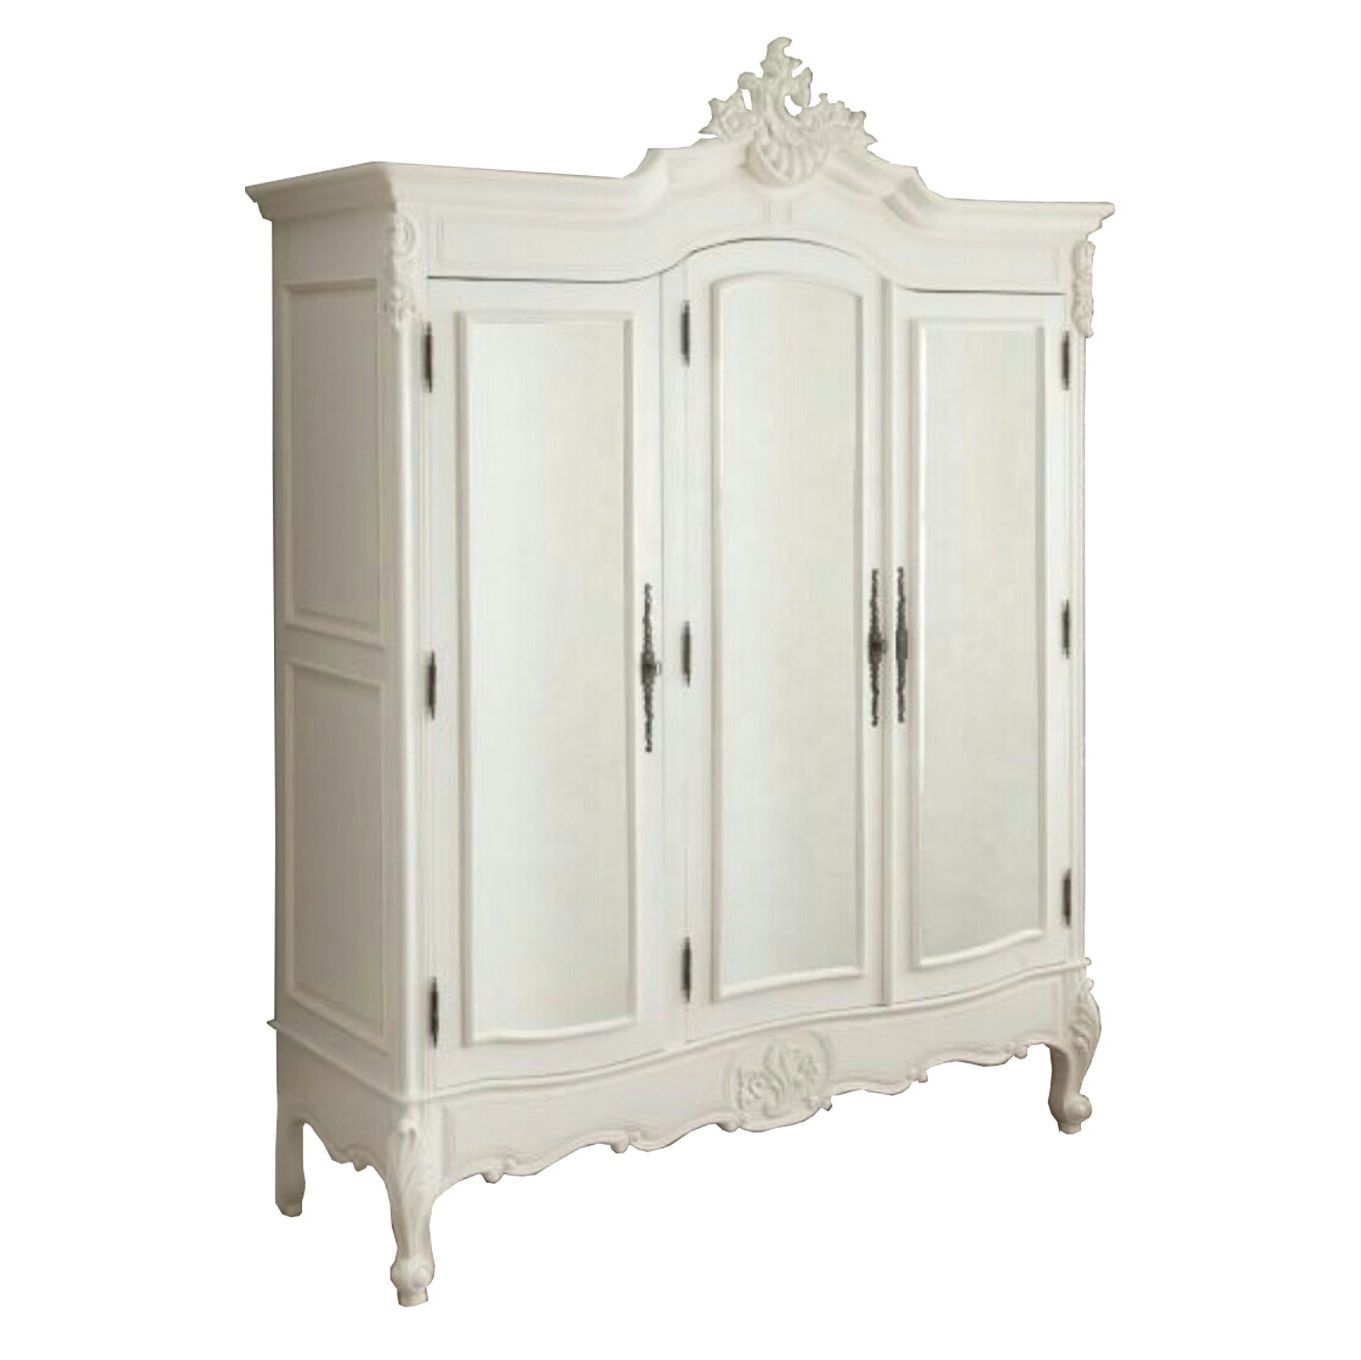 Source Antique Wooden Bedroom French Chateau White Painted 2 Door Double  Armoire Wardrobe On M (View 17 of 20)